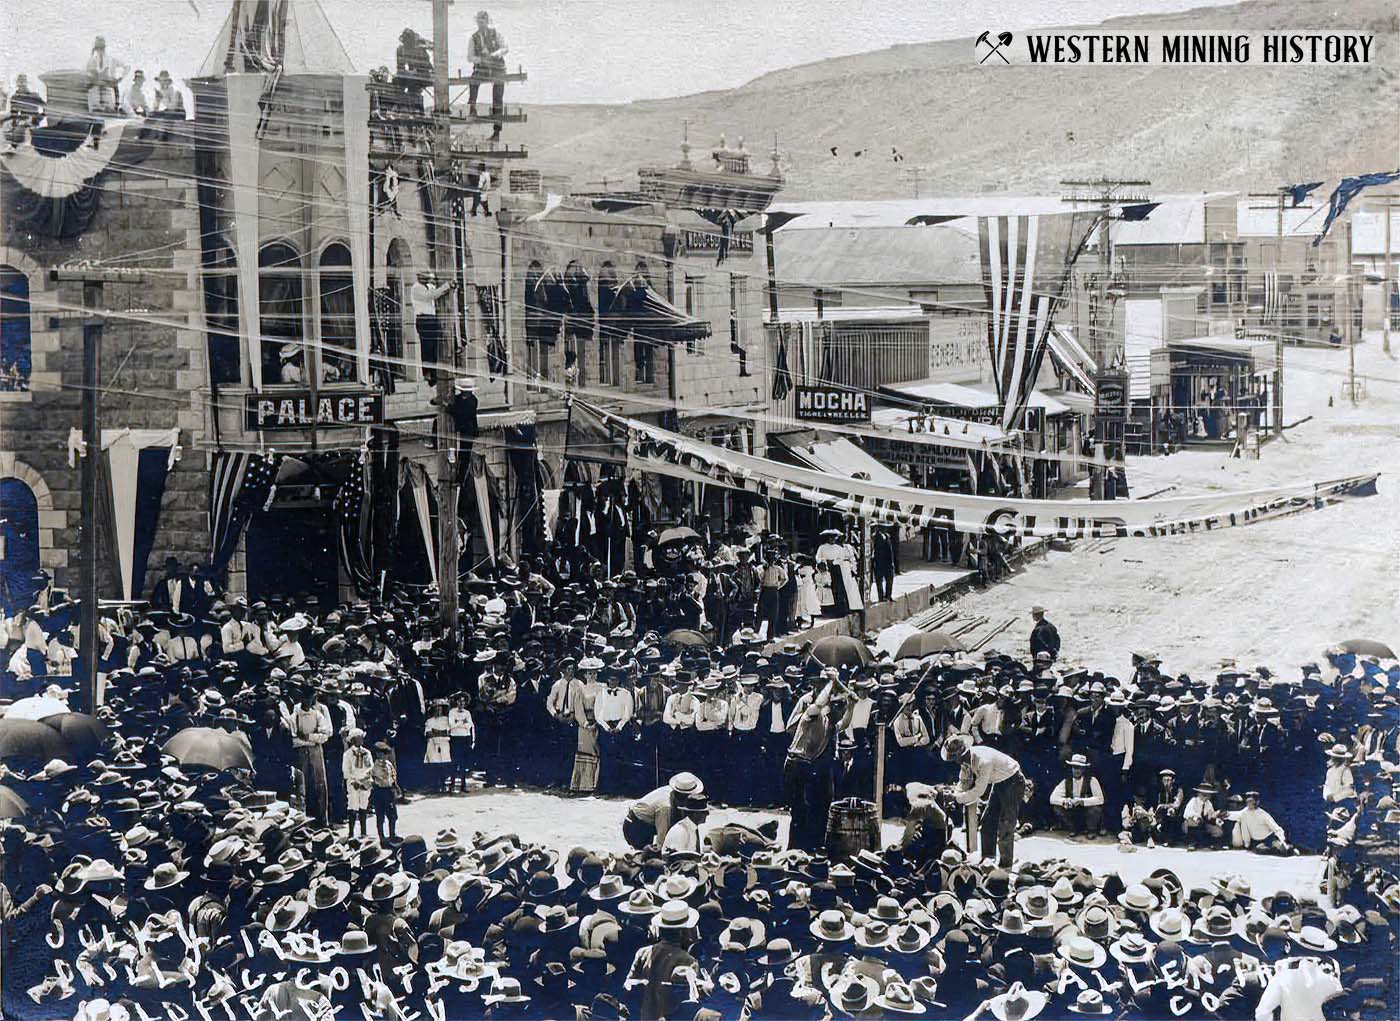 Drilling contest at Goldfield, Nevada July 4, 1906